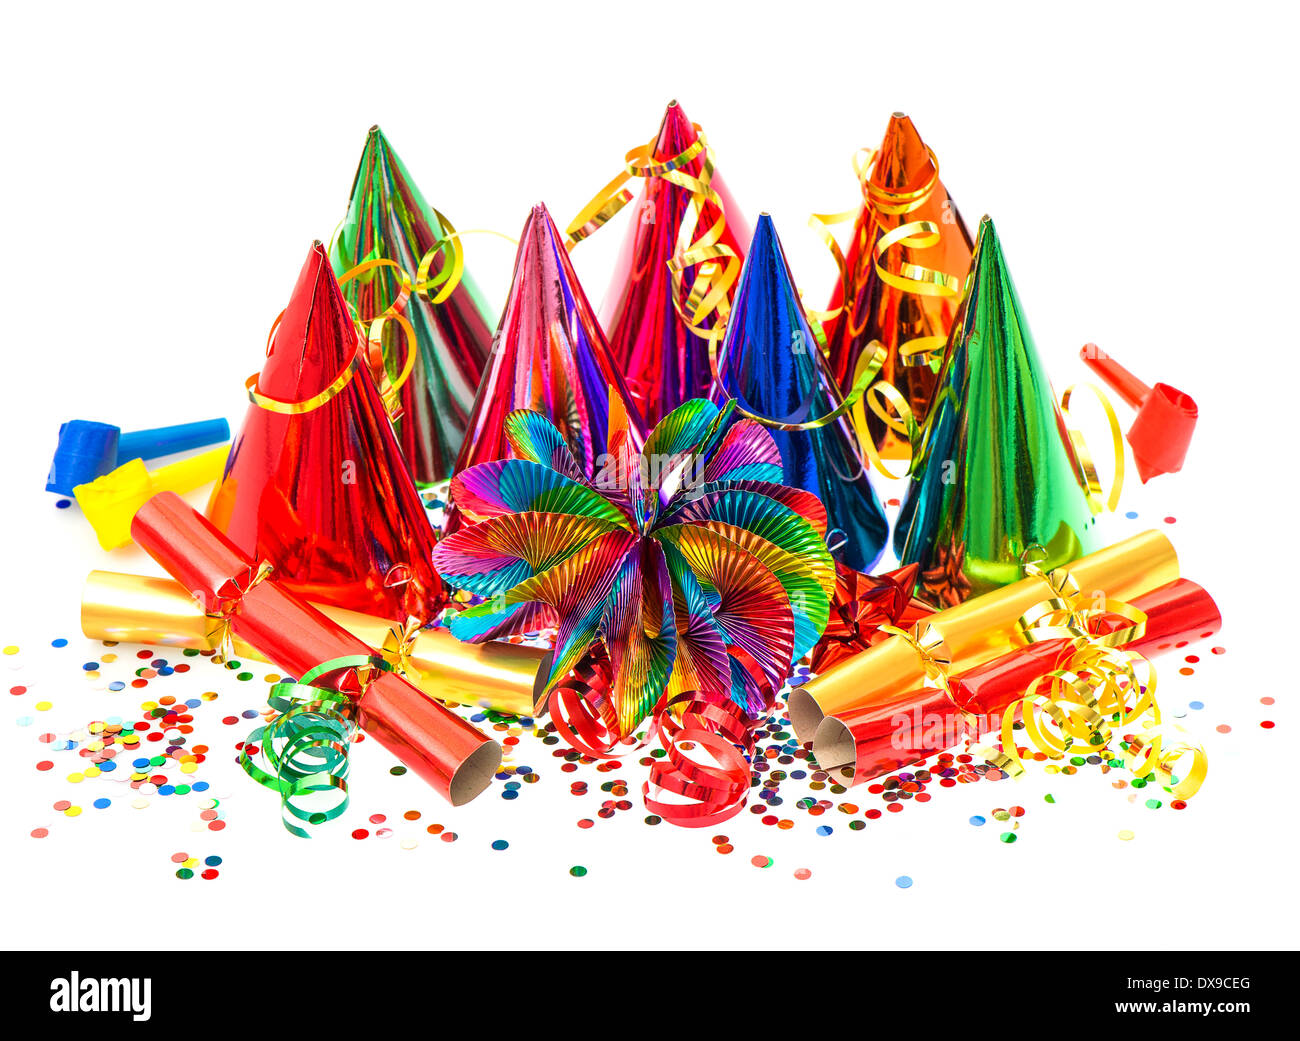 colorful garlands, streamer, party hats and confetti on white background. Stock Photo